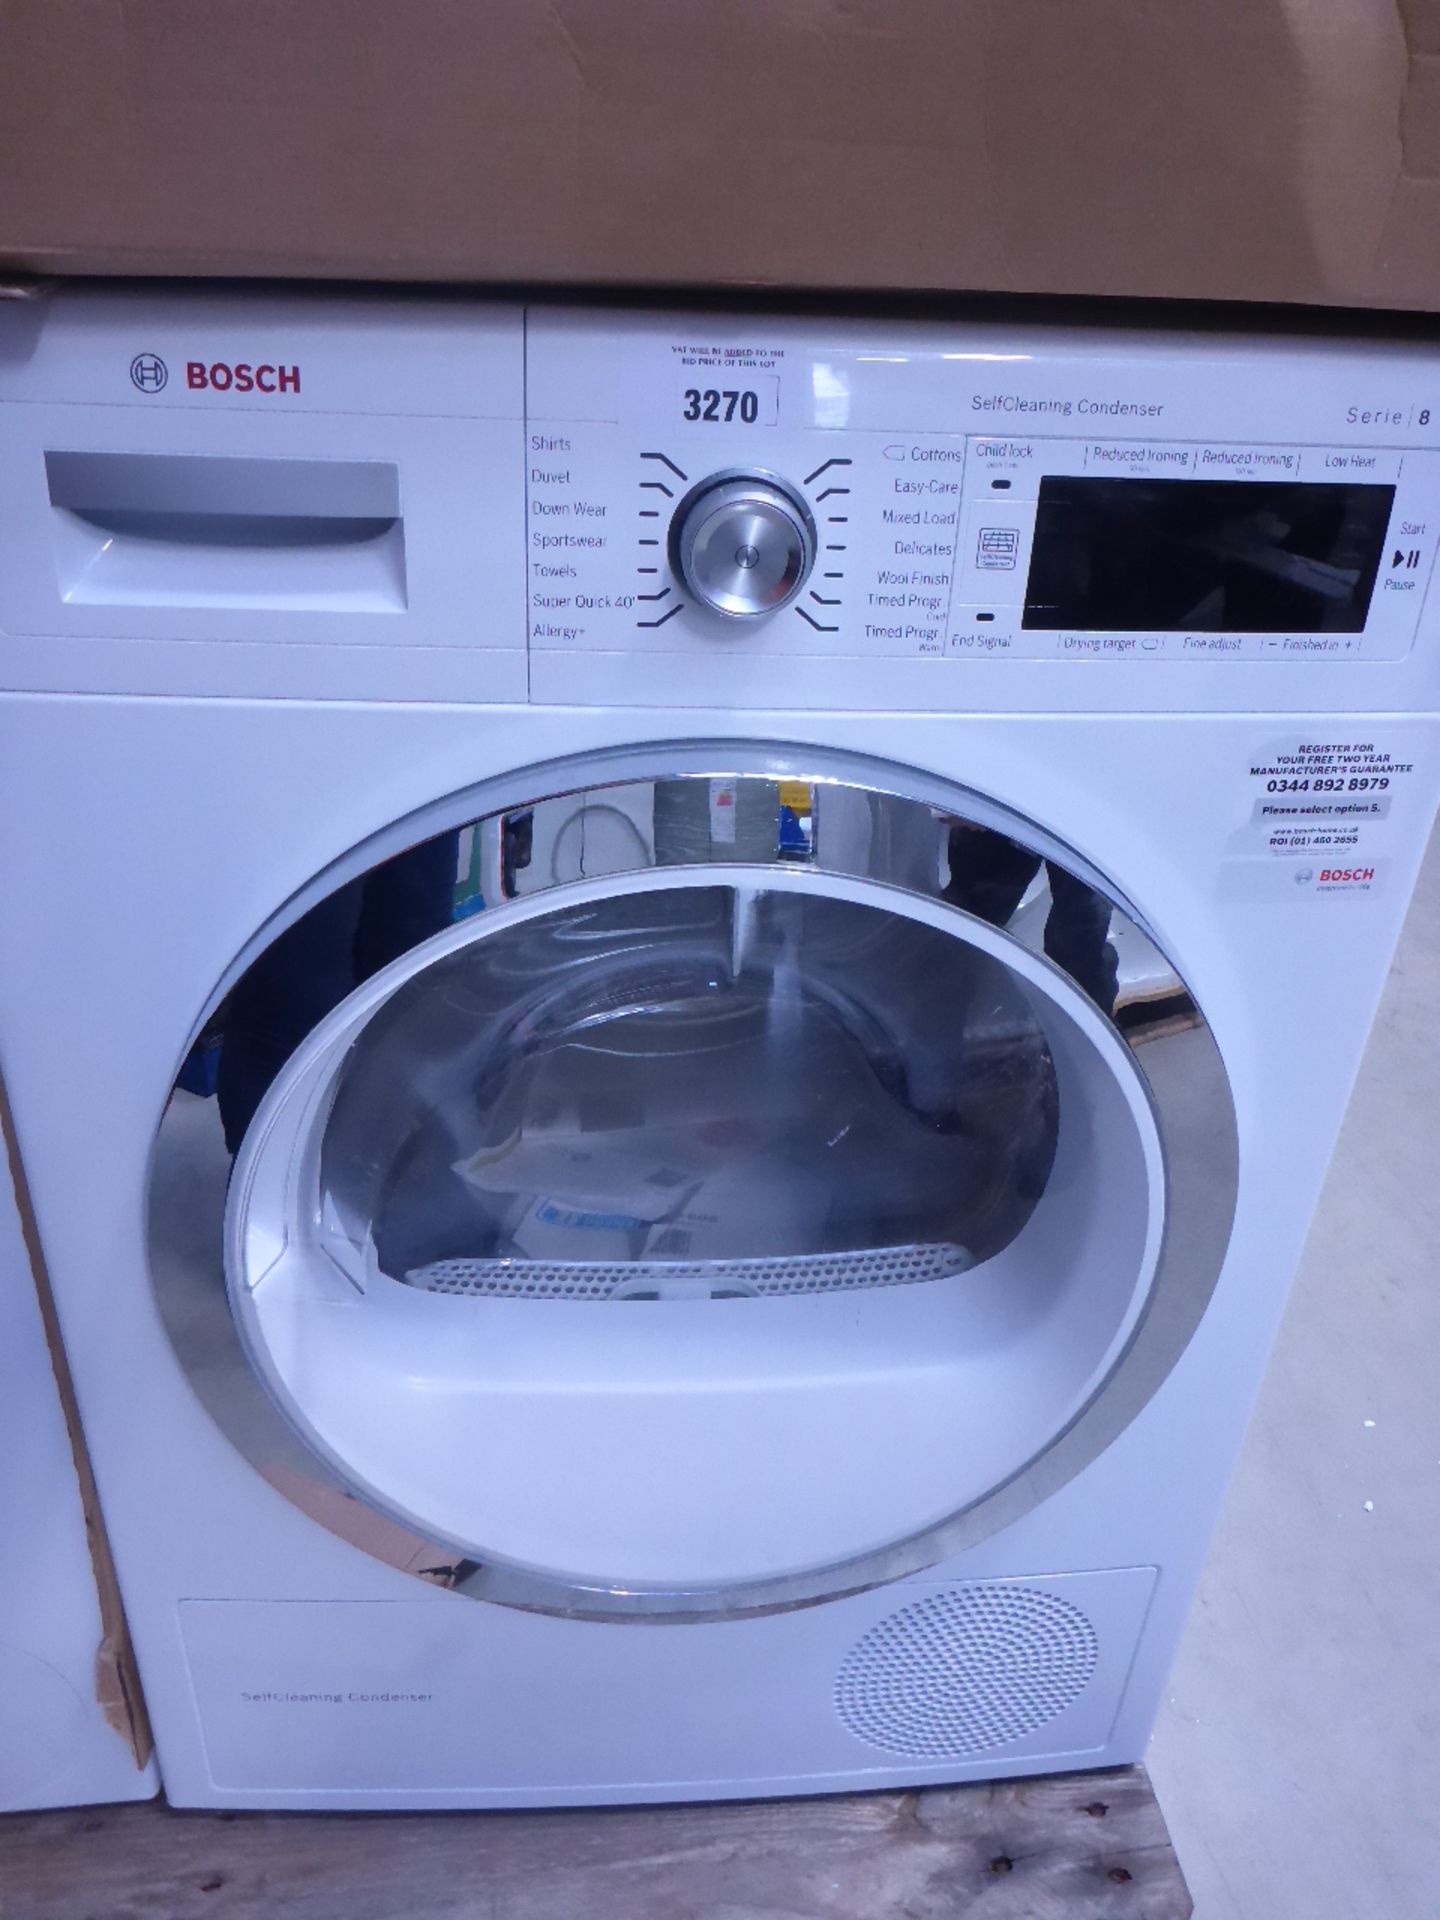 WTW87560GB Bosch Serie 8 self cleansing condensor tumble dryer